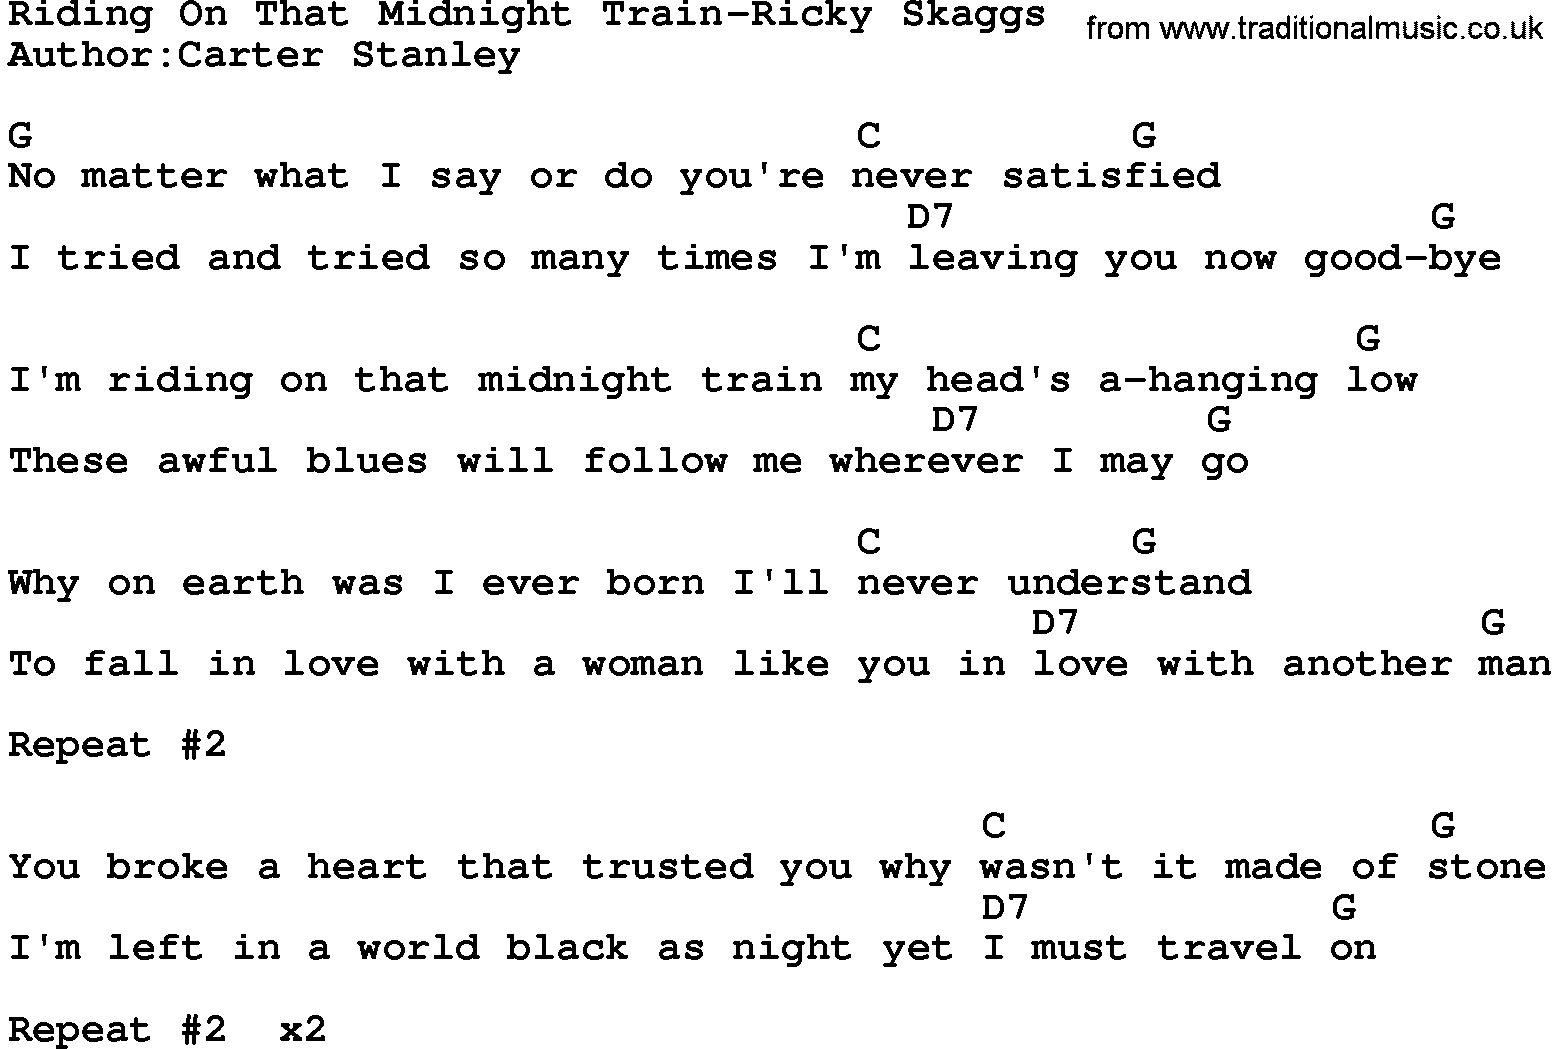 Country music song: Riding On That Midnight Train-Ricky Skaggs lyrics and chords